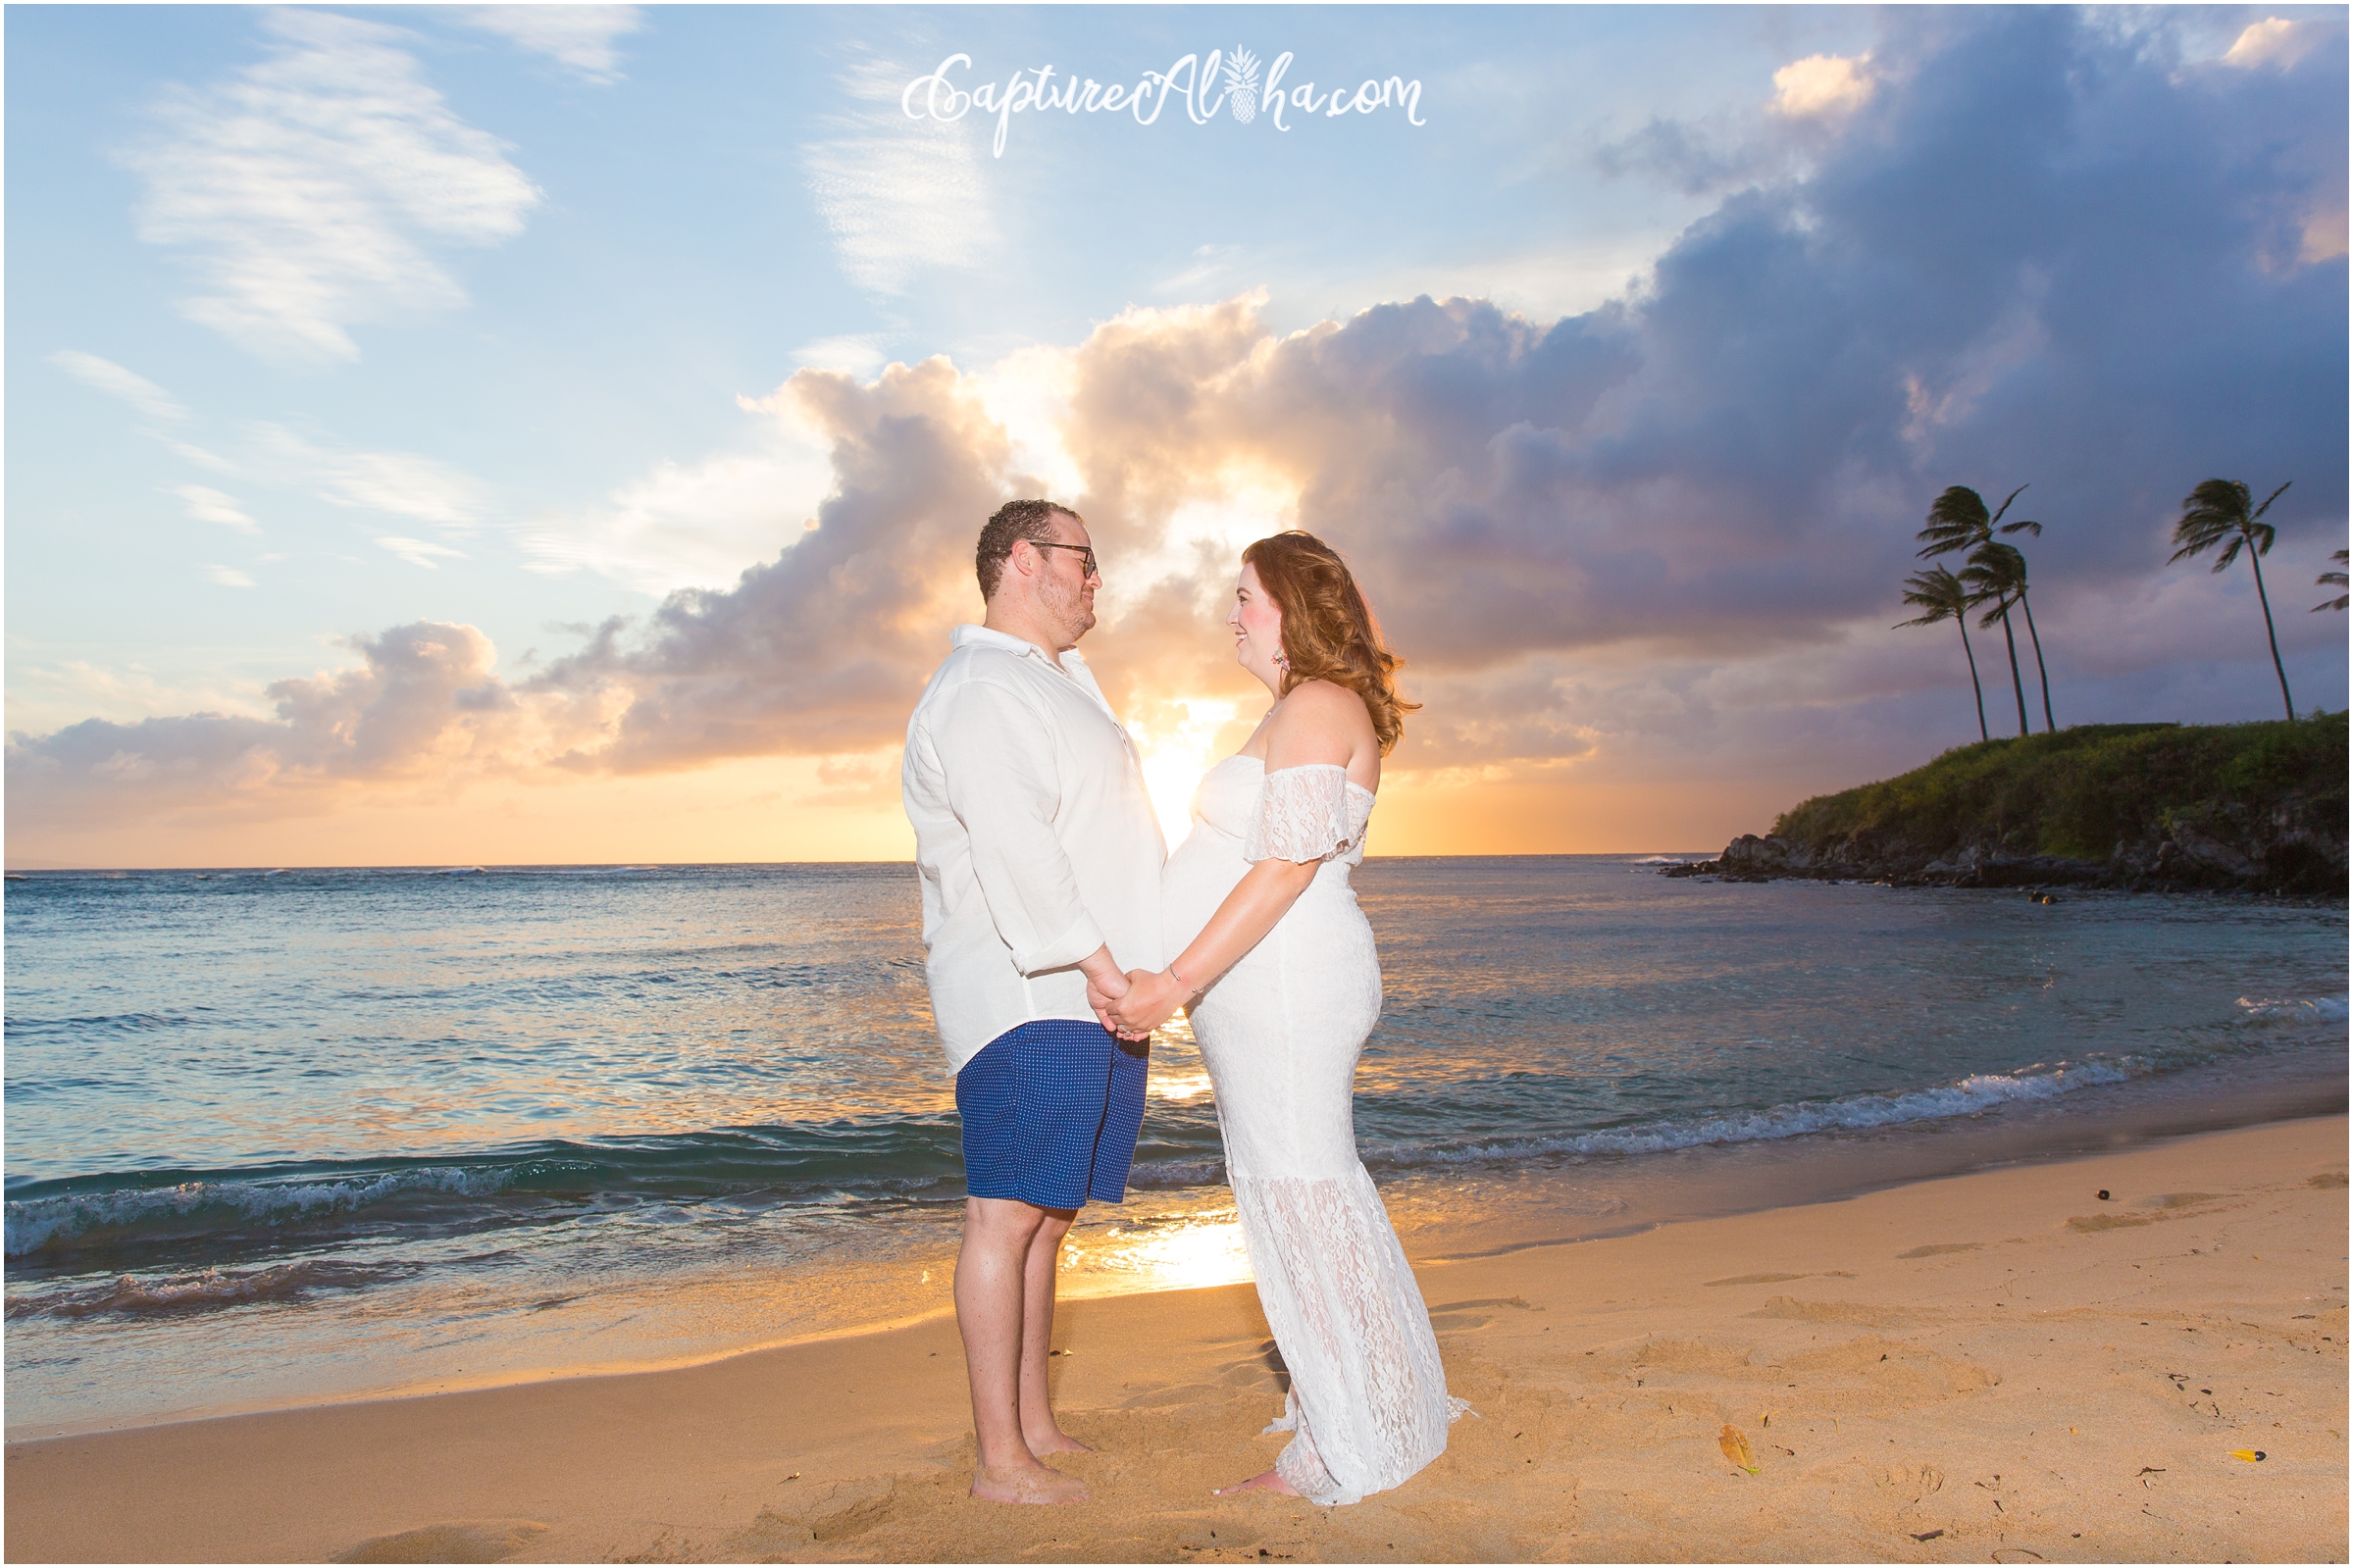 Maui Maternity Photographer at Kapalua Bay with Pregnant couple on the beach at sunset in Maui